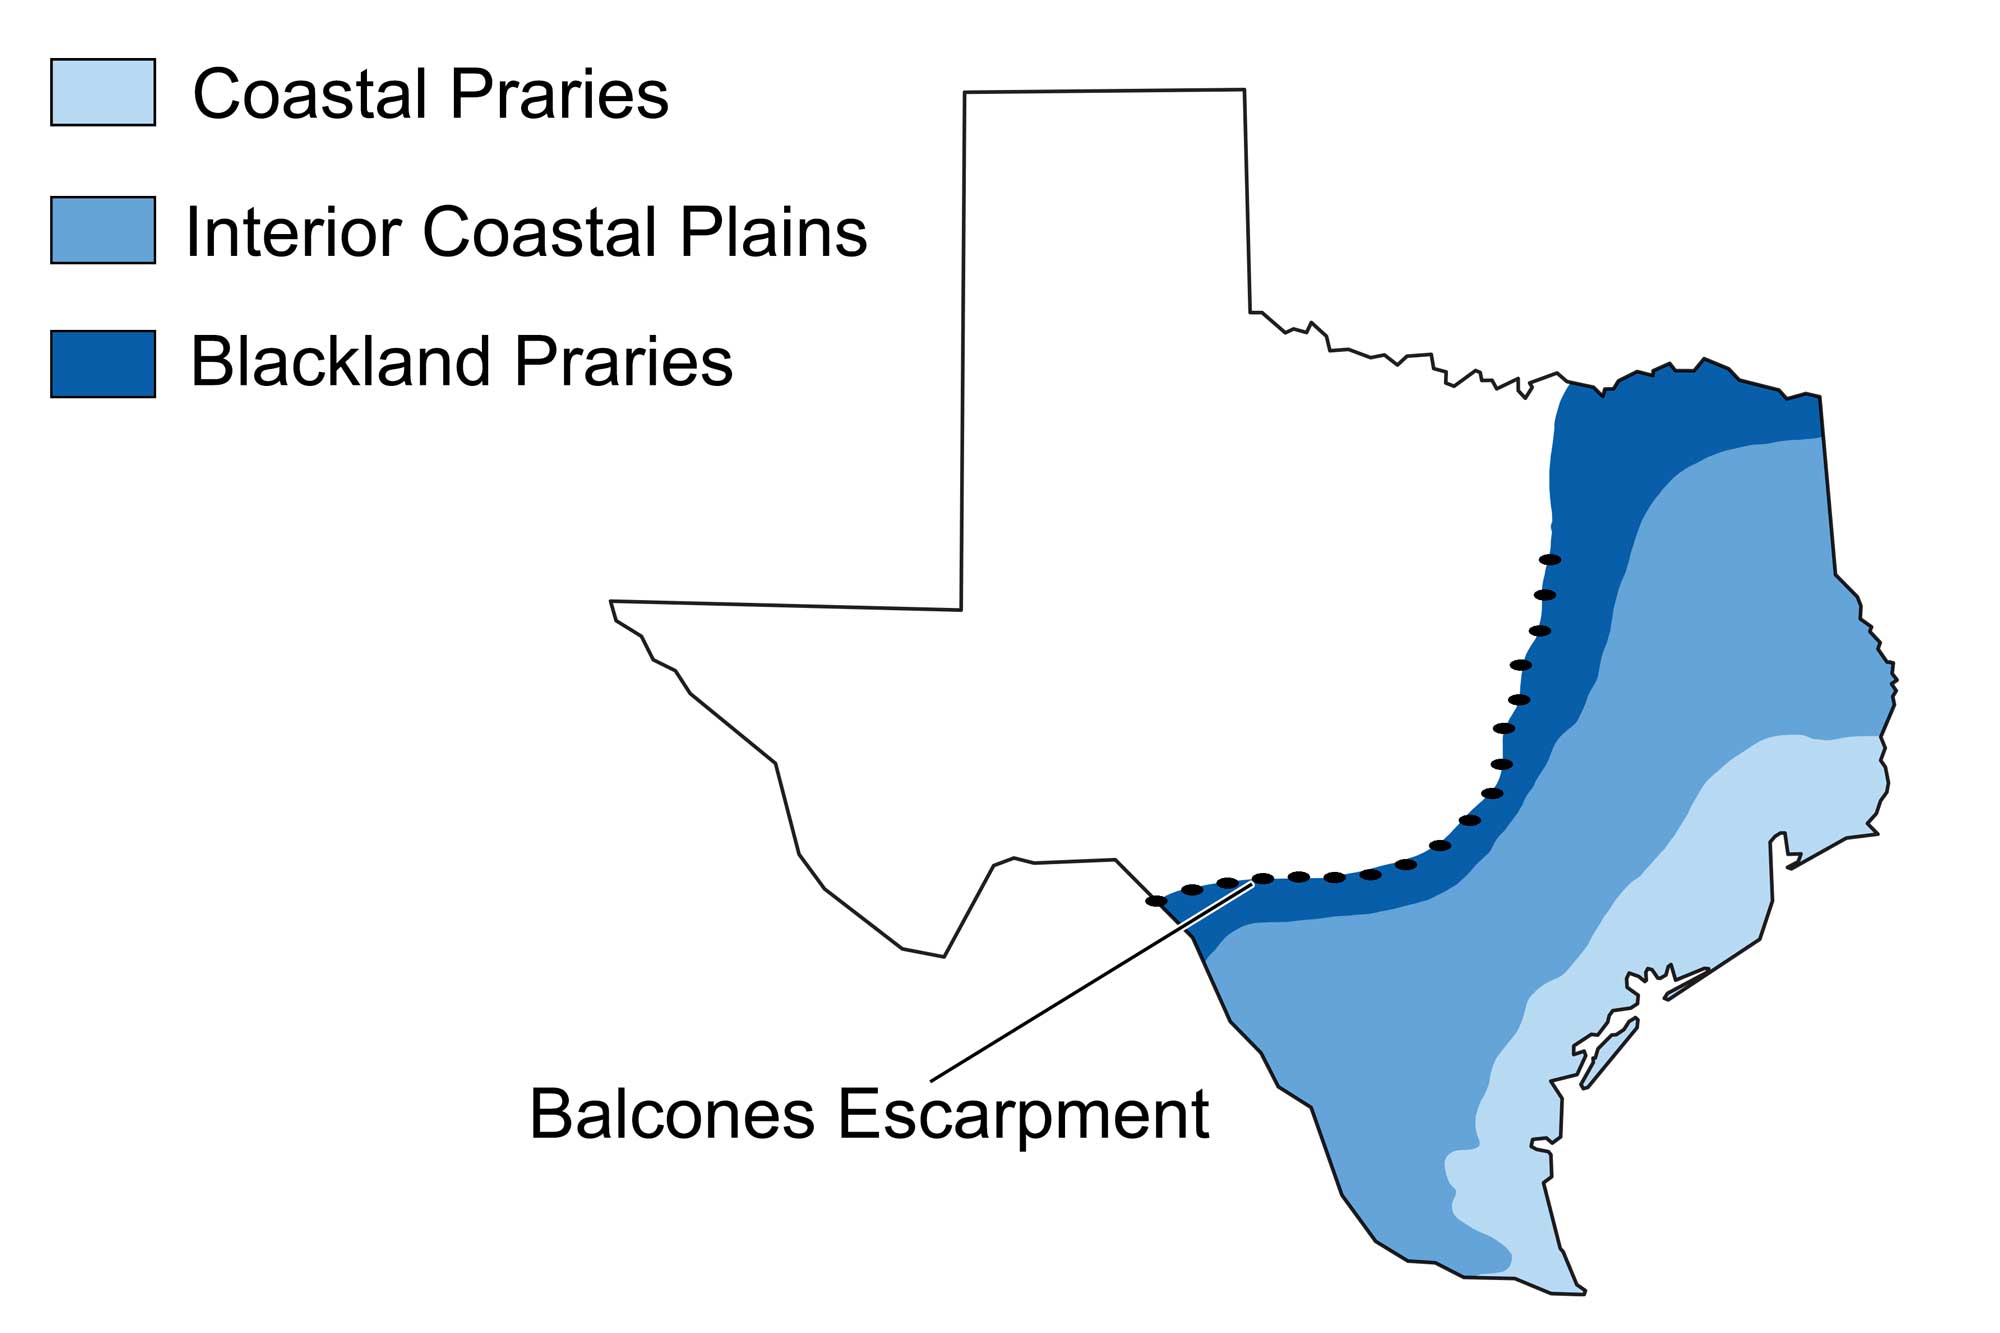 Simple map showing the physiographic provinces of the Coastal Plain region of Texas.